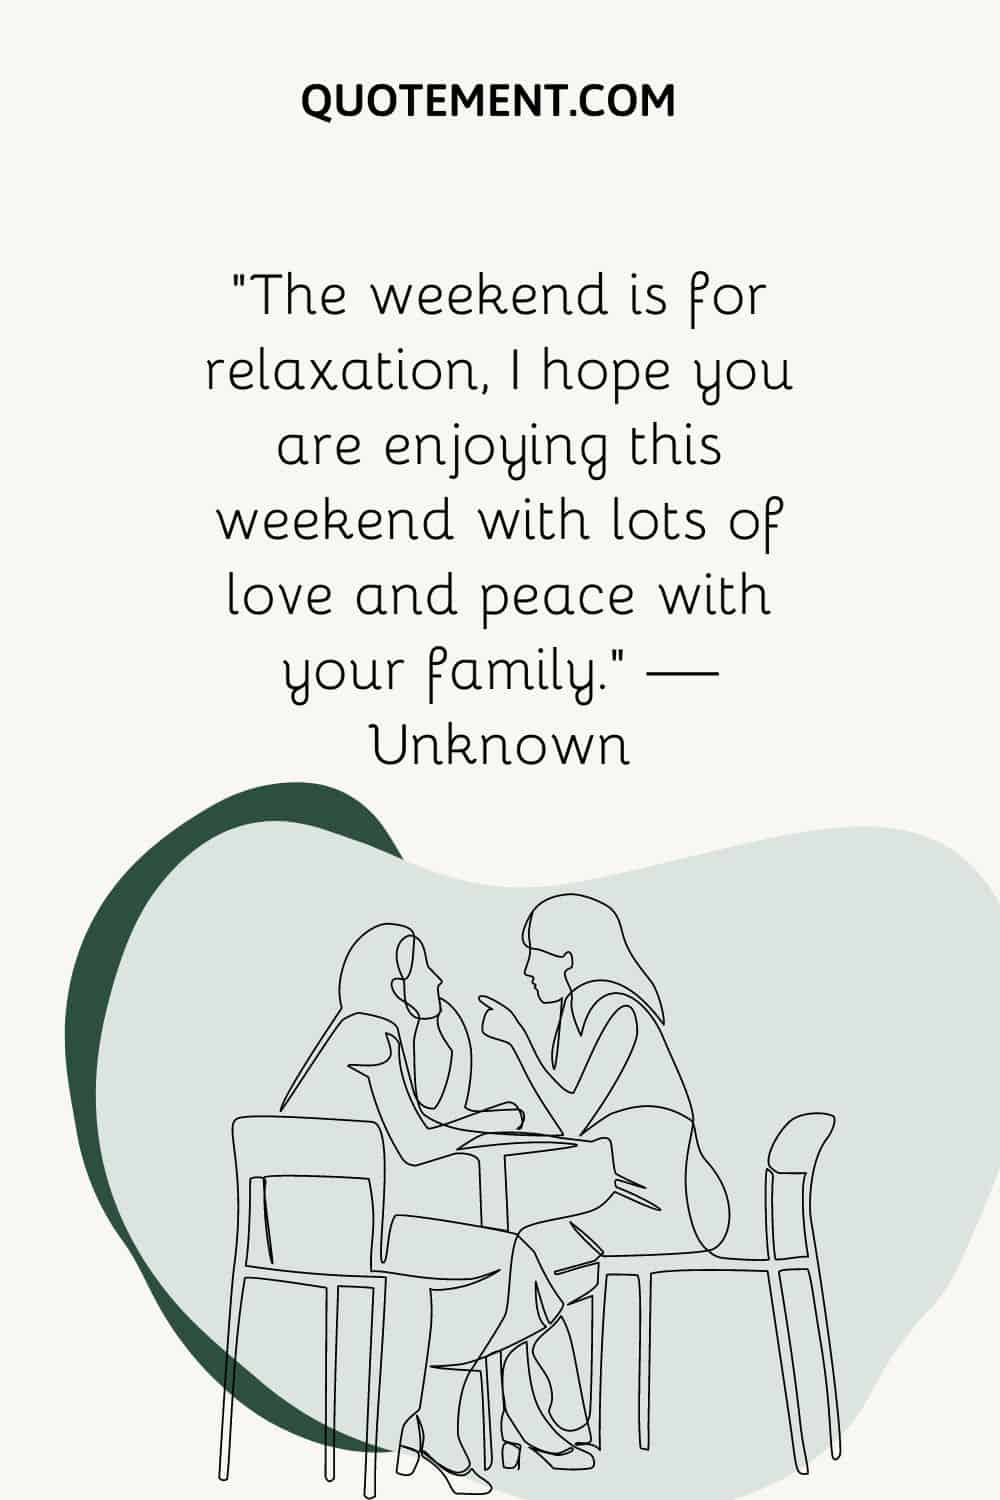 “The weekend is for relaxation, I hope you are enjoying this weekend with lots of love and peace with your family.” — Unknown